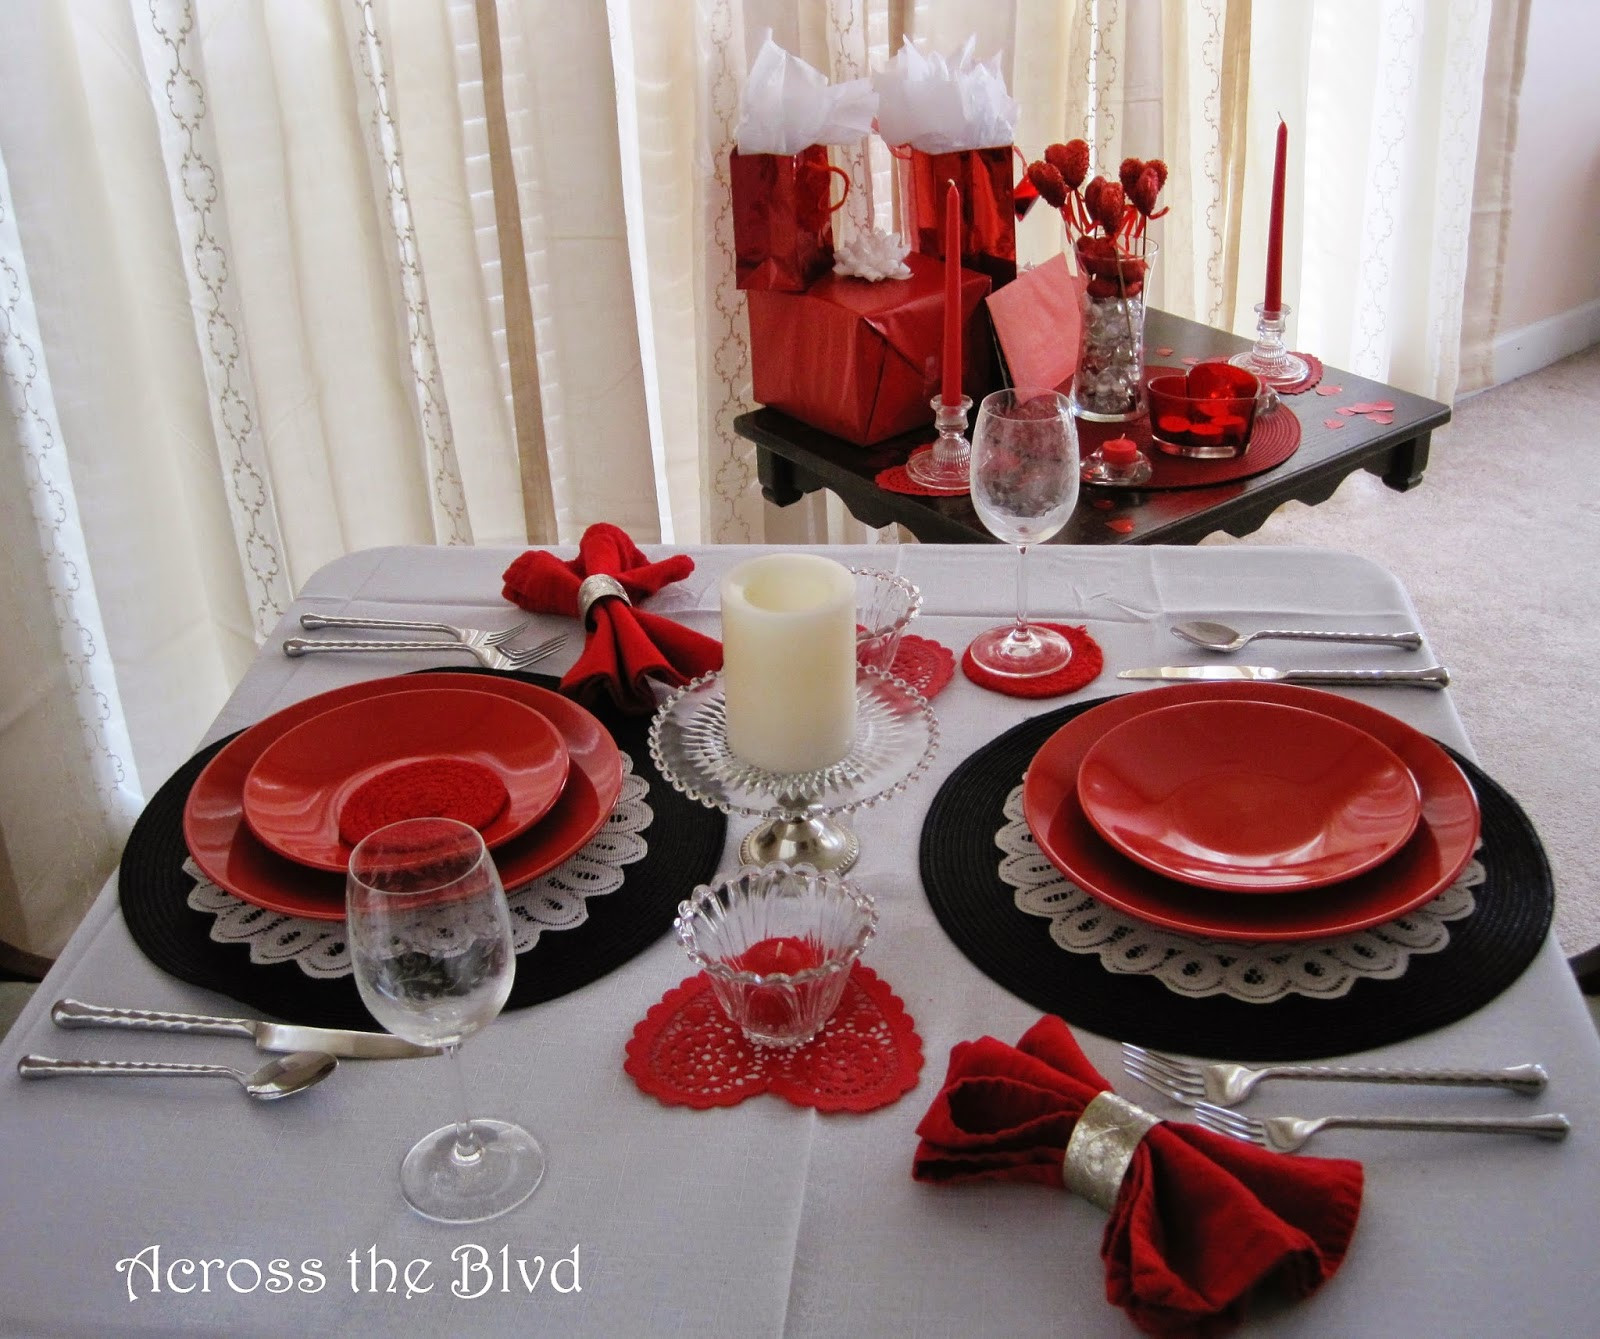 Valentines Dinners At Home
 Across the Boulevard Table For Two At Home for Valentine